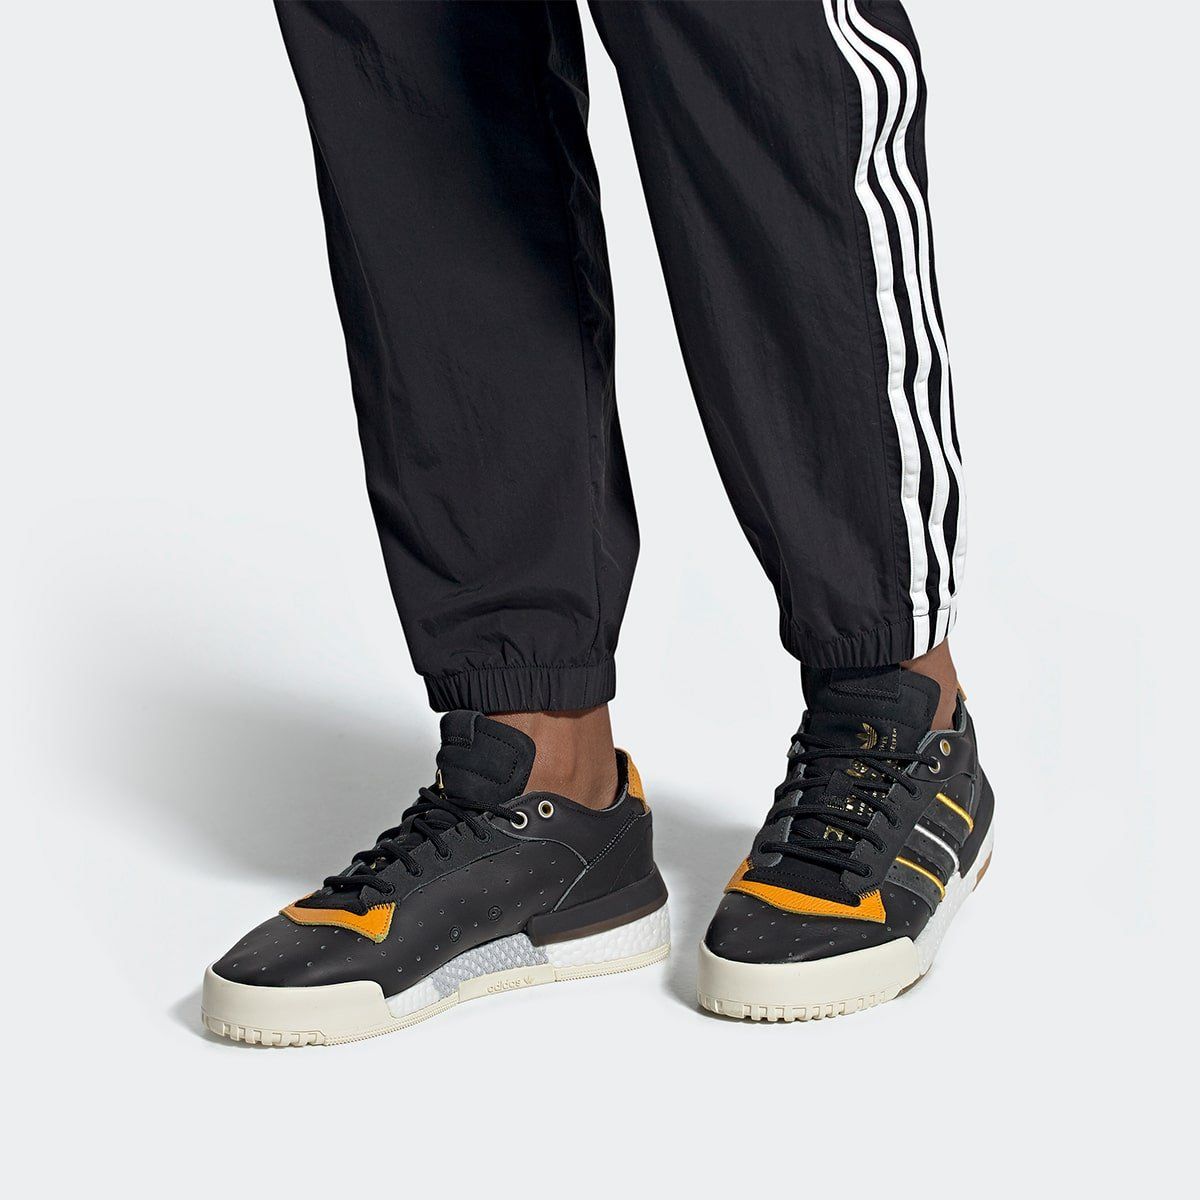 adidas rivalry low mens